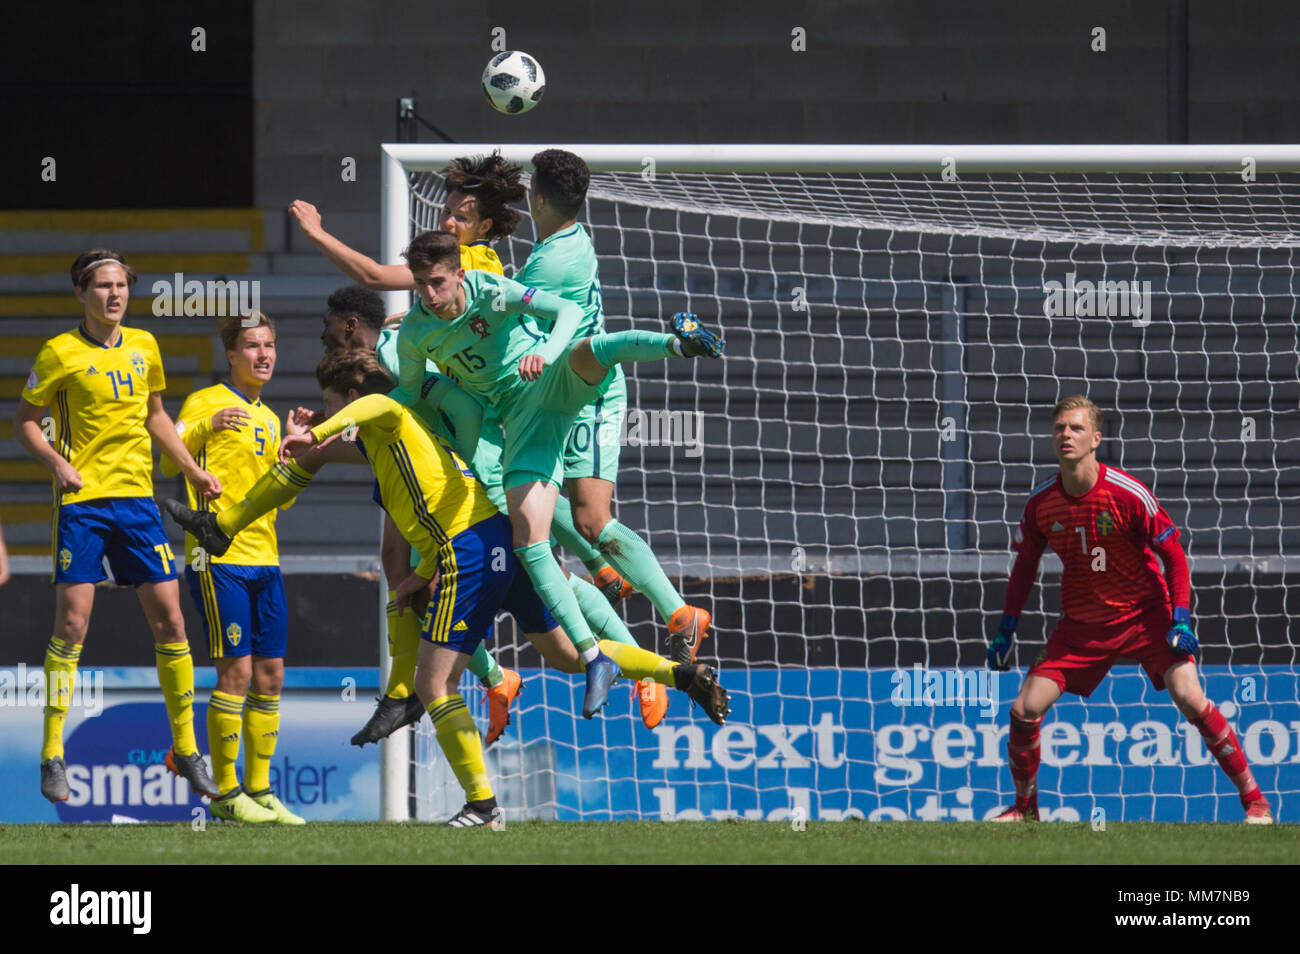 Bernardo Silva (Portugal) and Goncalo Ramos (Portugal) try to get on a high ball during the 2018 UEFA European Under-17 Championship Group B match between Sweden and Portugal at Pirelli Stadium on May 10th 2018 in Burton upon Trent, England. (Photo by Richard Burley/phcimages.com) Stock Photo